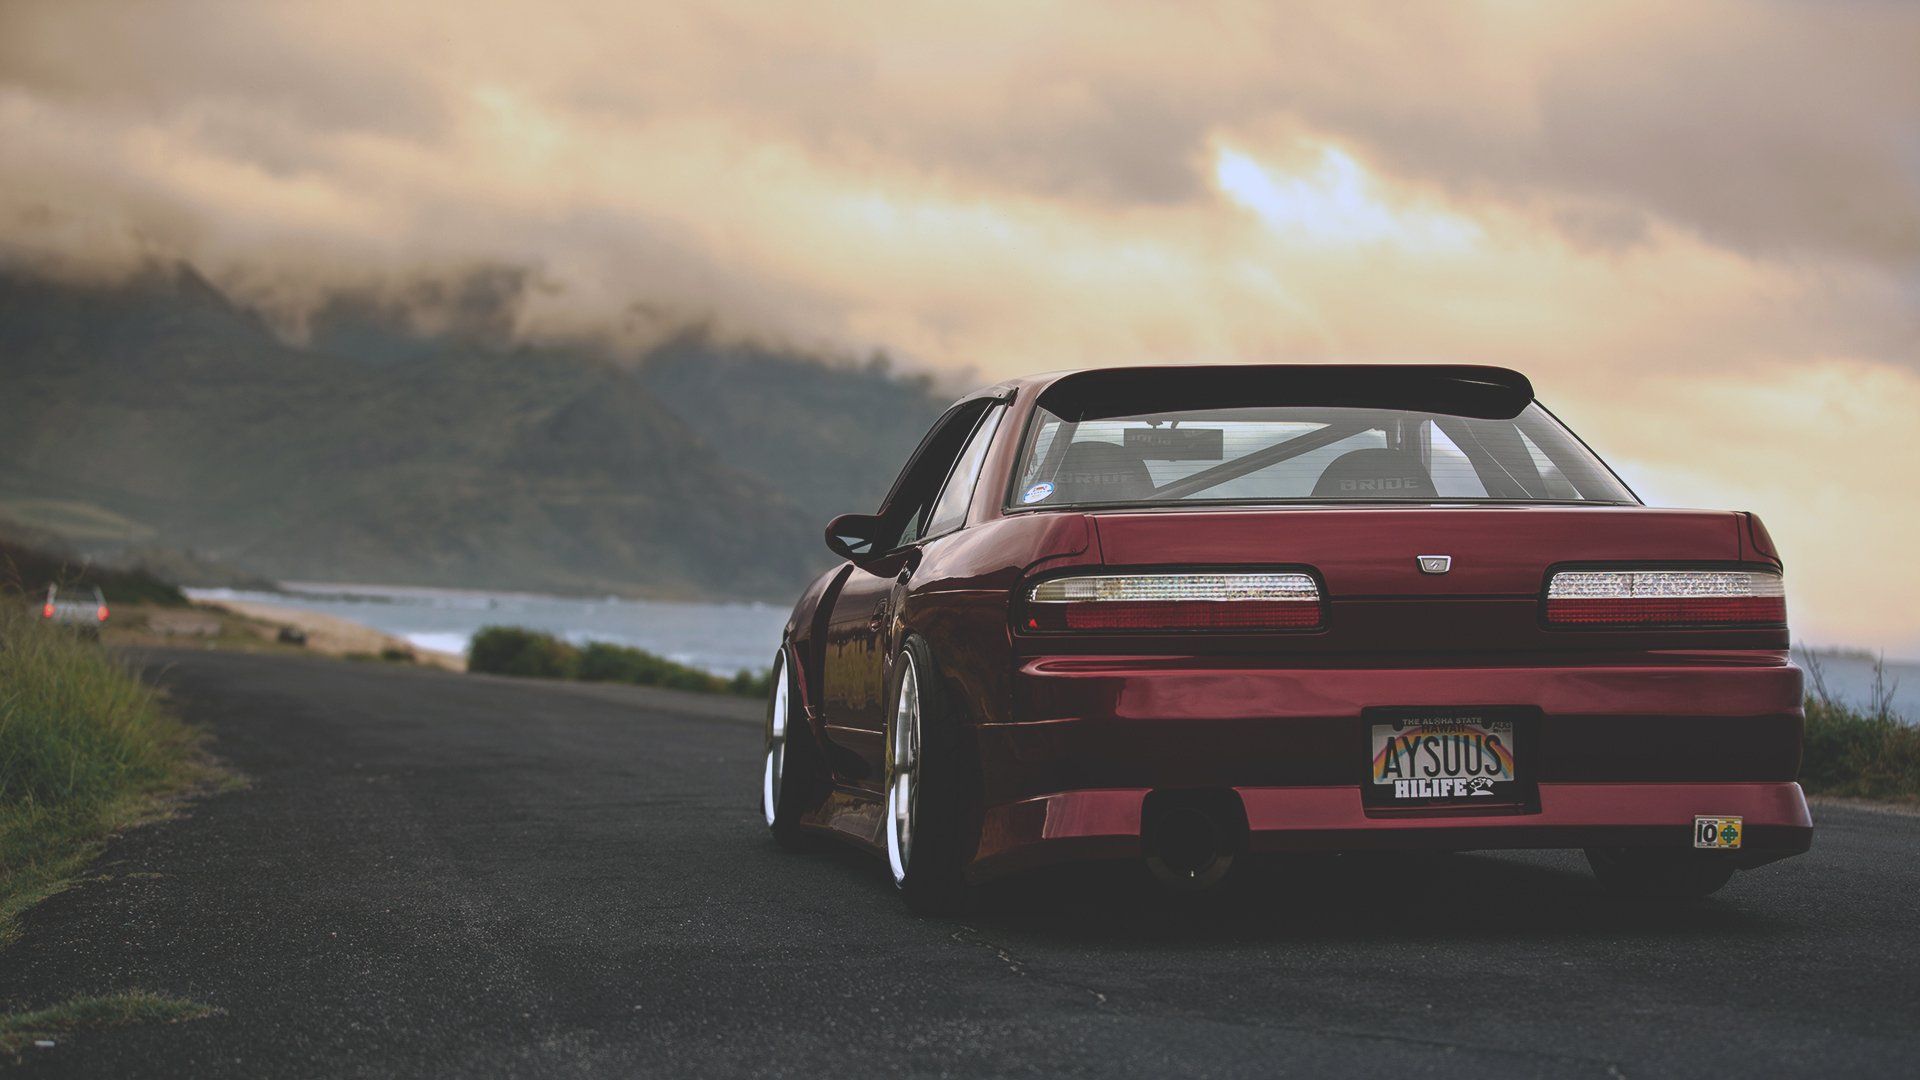 1920x1080 Nissan 240SX, tuning, rear view, 240SX, tuning, 1920x1080, wallpaper, picture, image - JDM